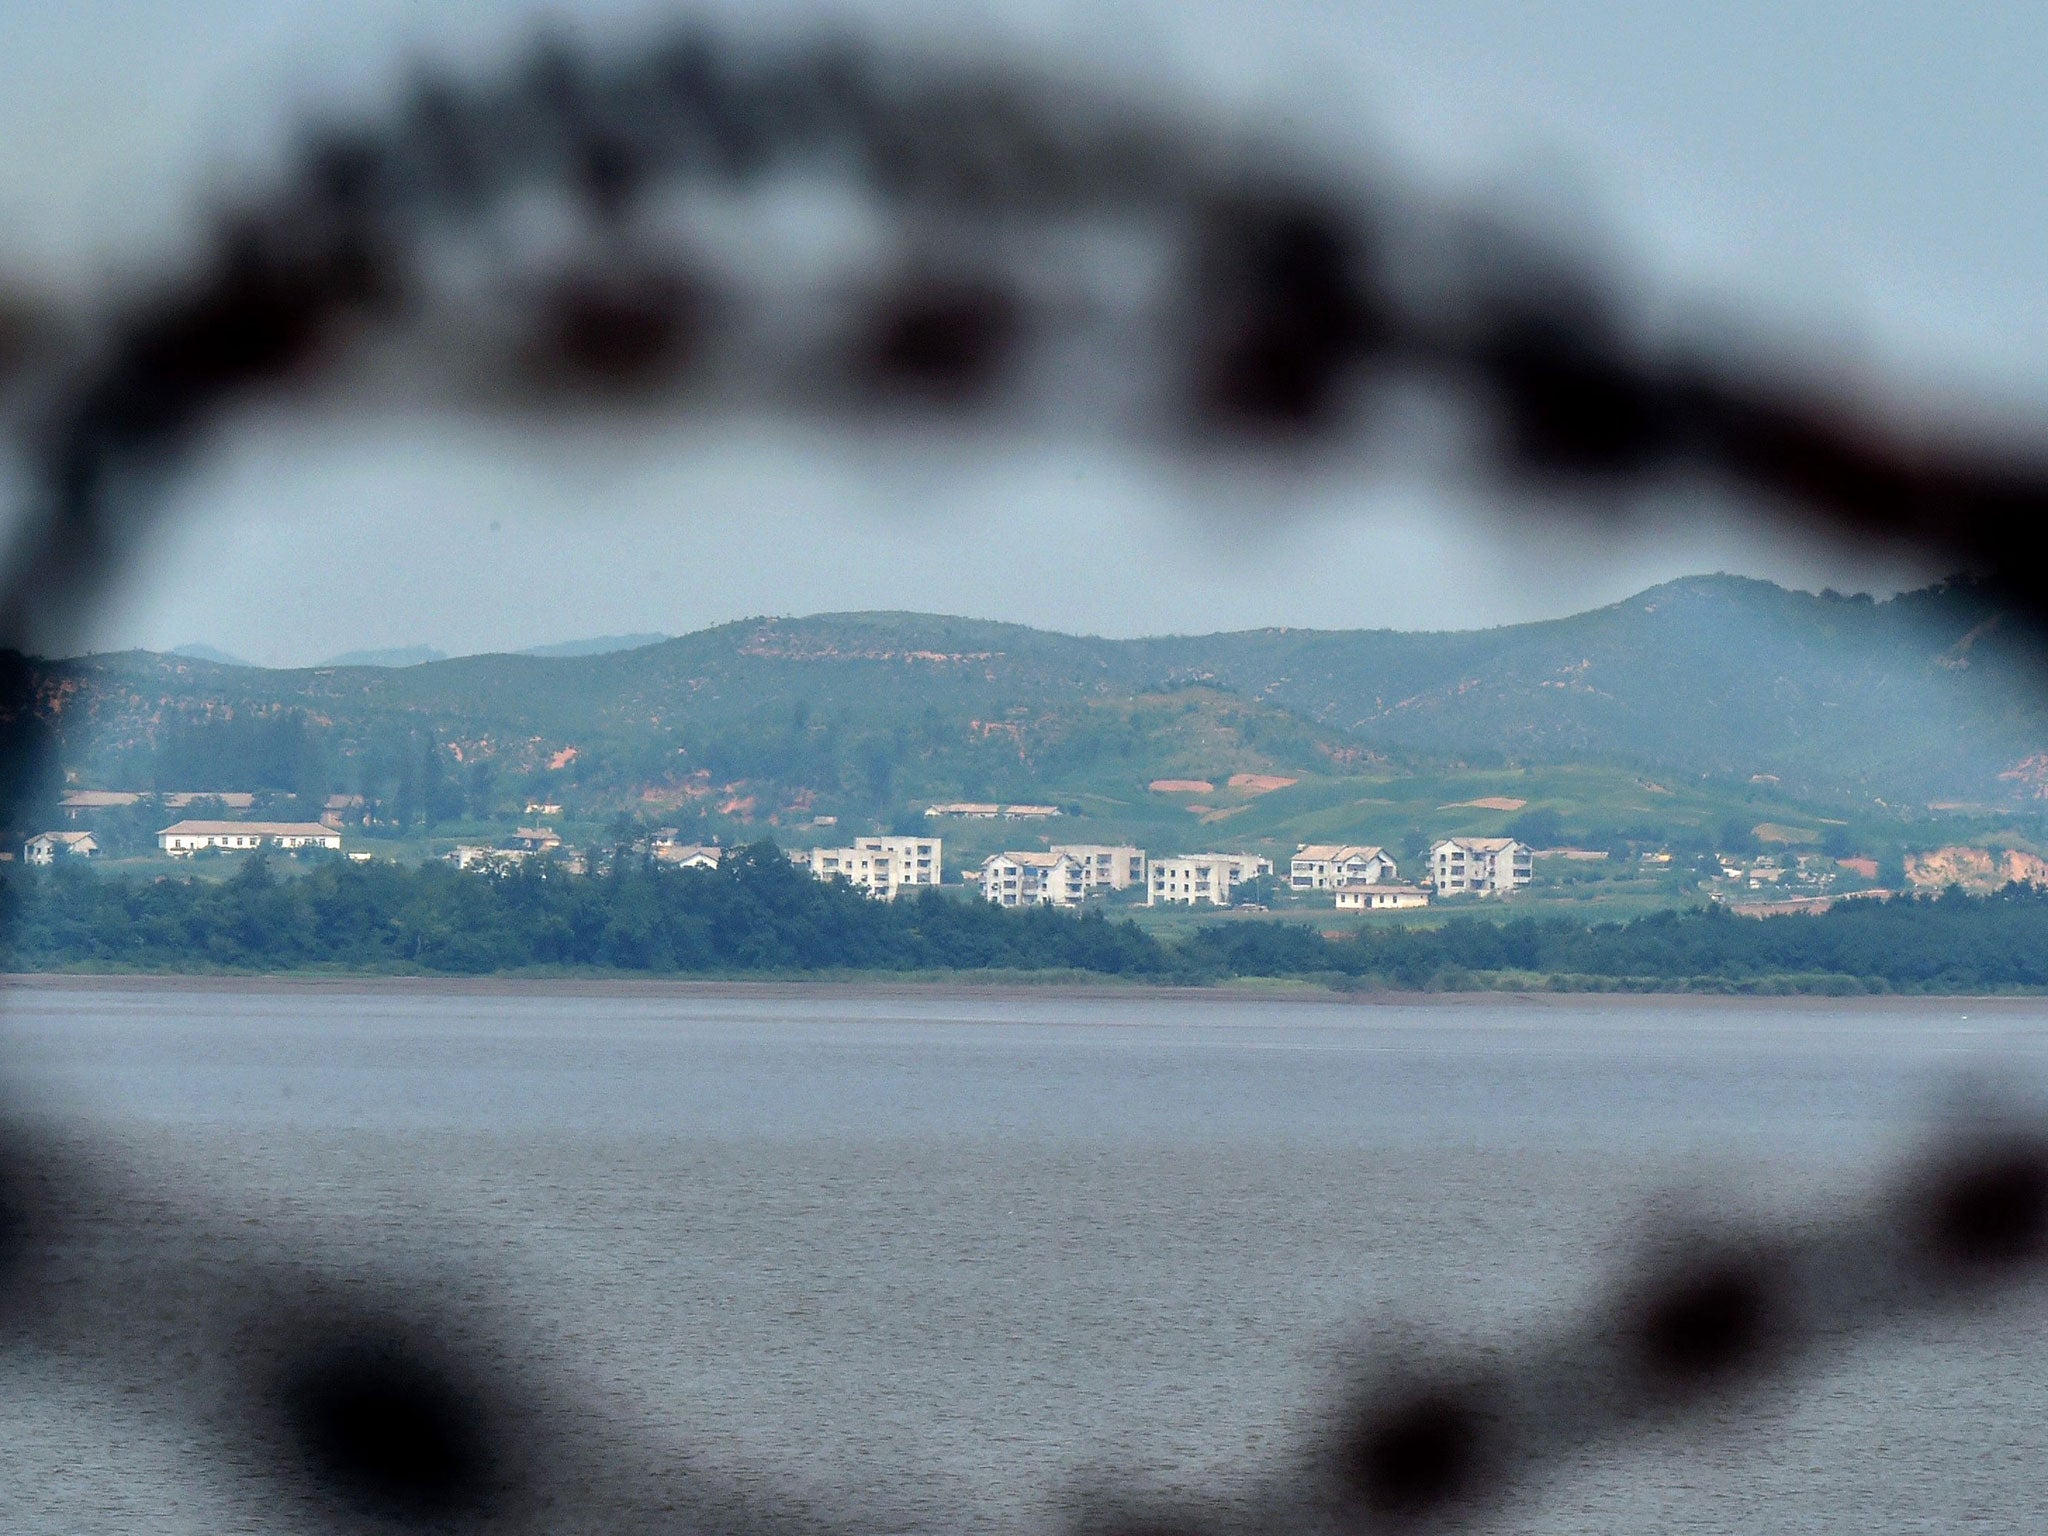 A view on the North Korean side of the Military Demarcation Line in the Demilitarized Zone (DMZ), seen from South Korea, on 24 August 2015